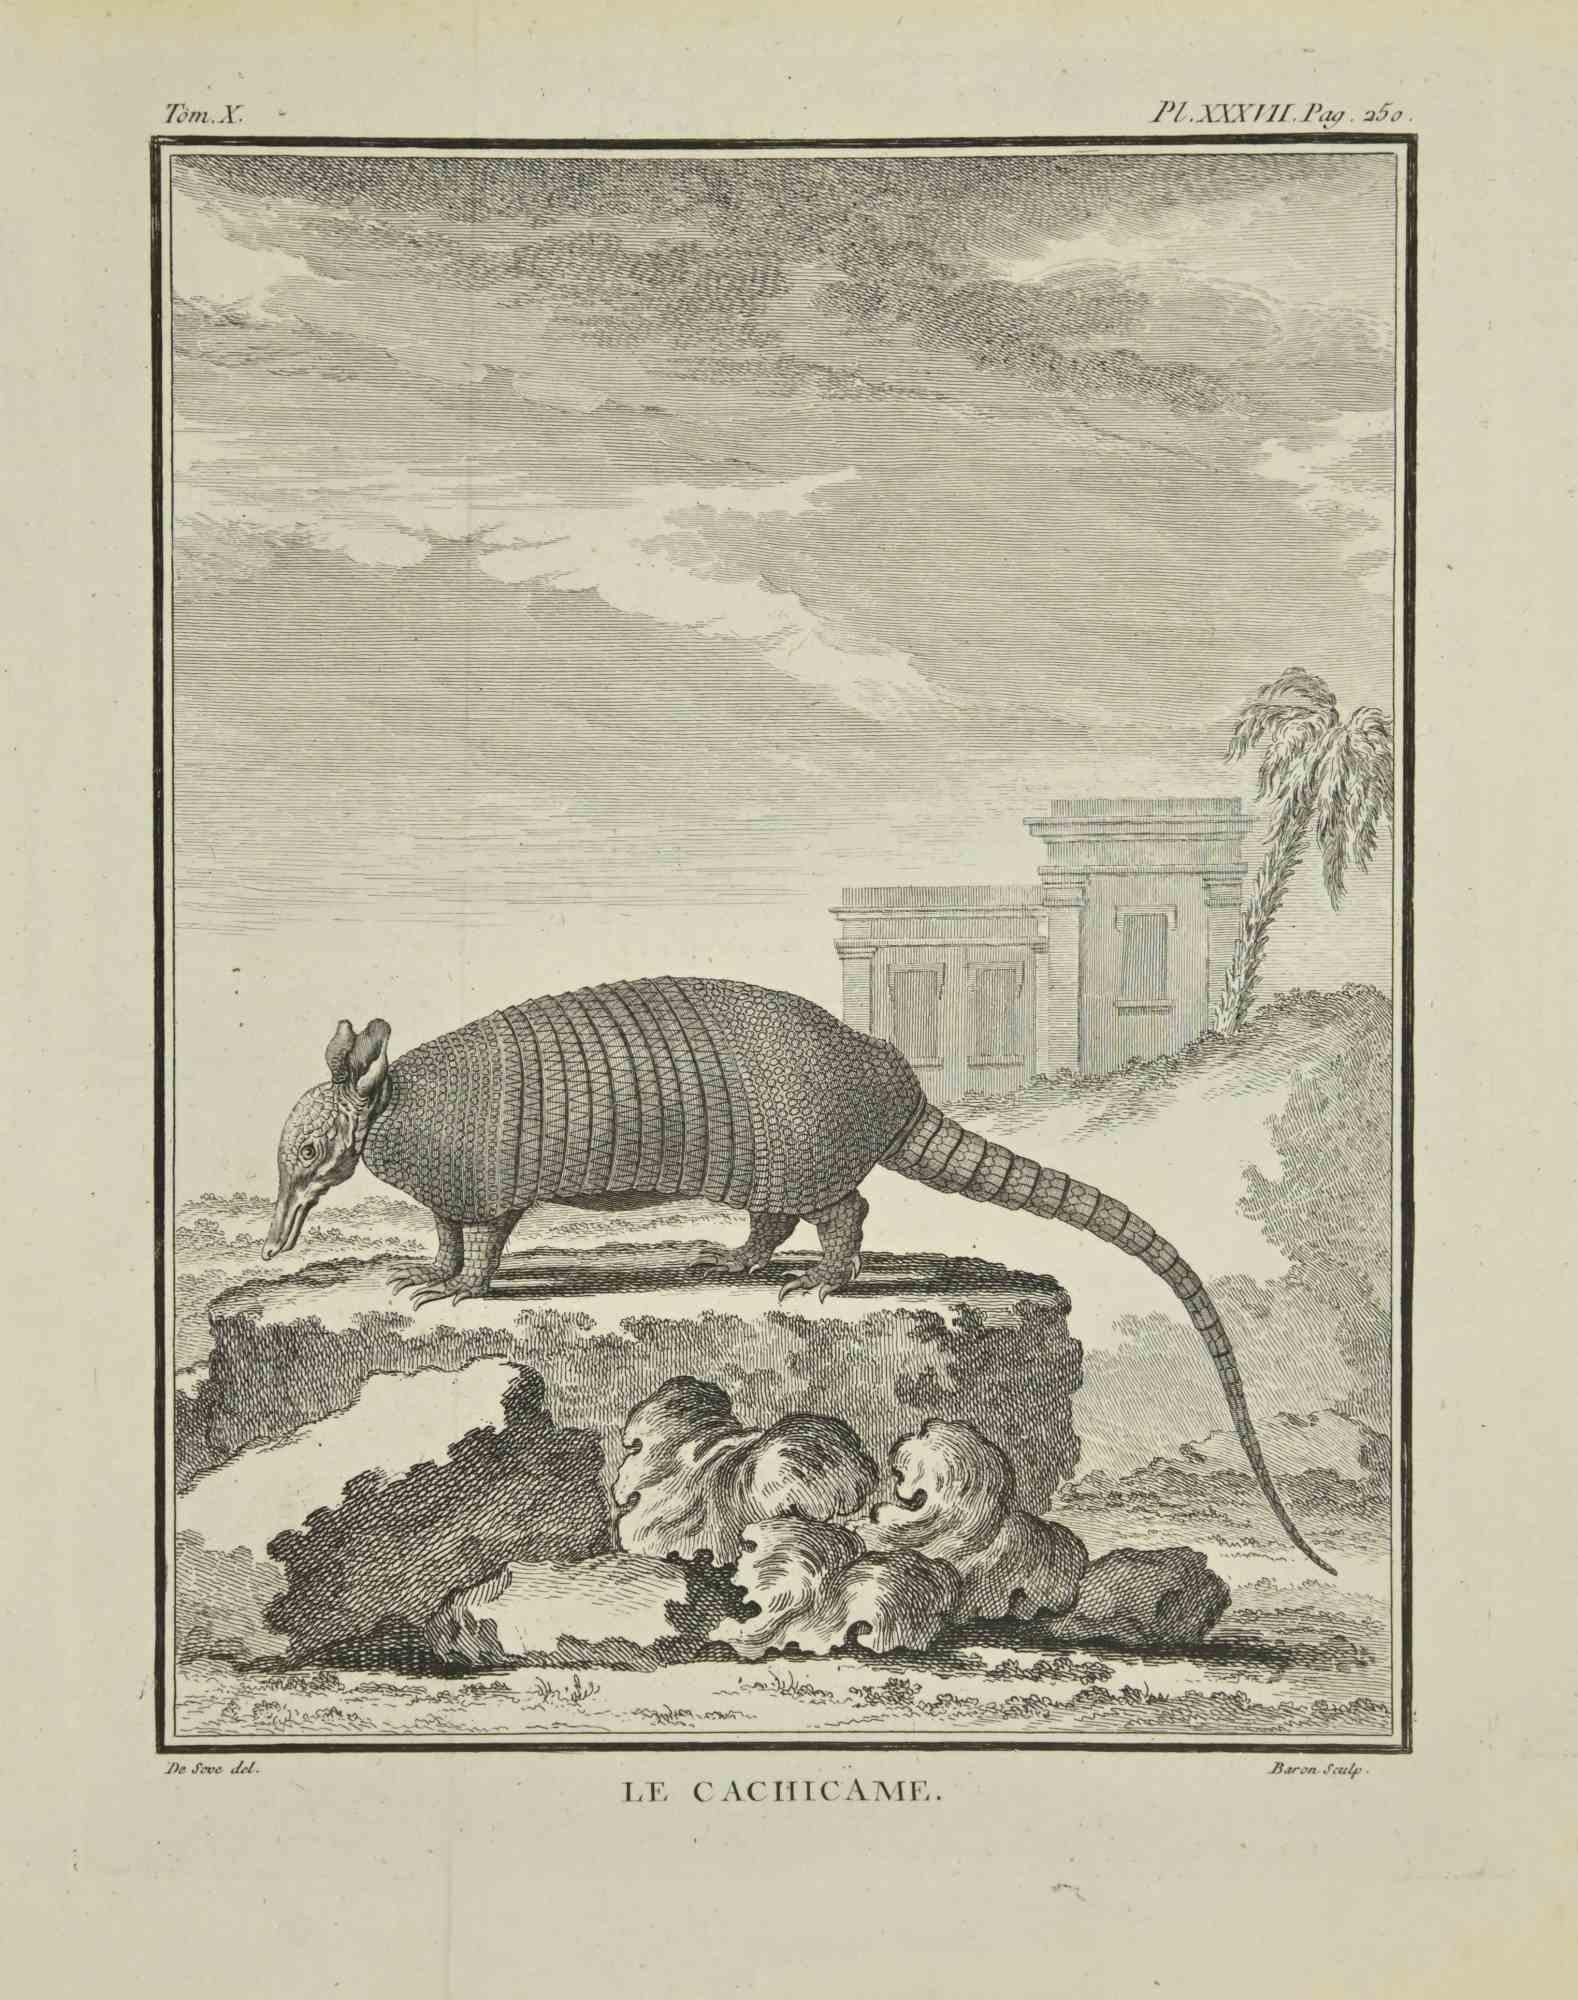 Le Caciicame is an etching realized by Jacques Baron in 1771.

It belongs to the suite "Histoire Naturelle de Buffon".

The Artist's signature is engraved lower right.

Good conditions.